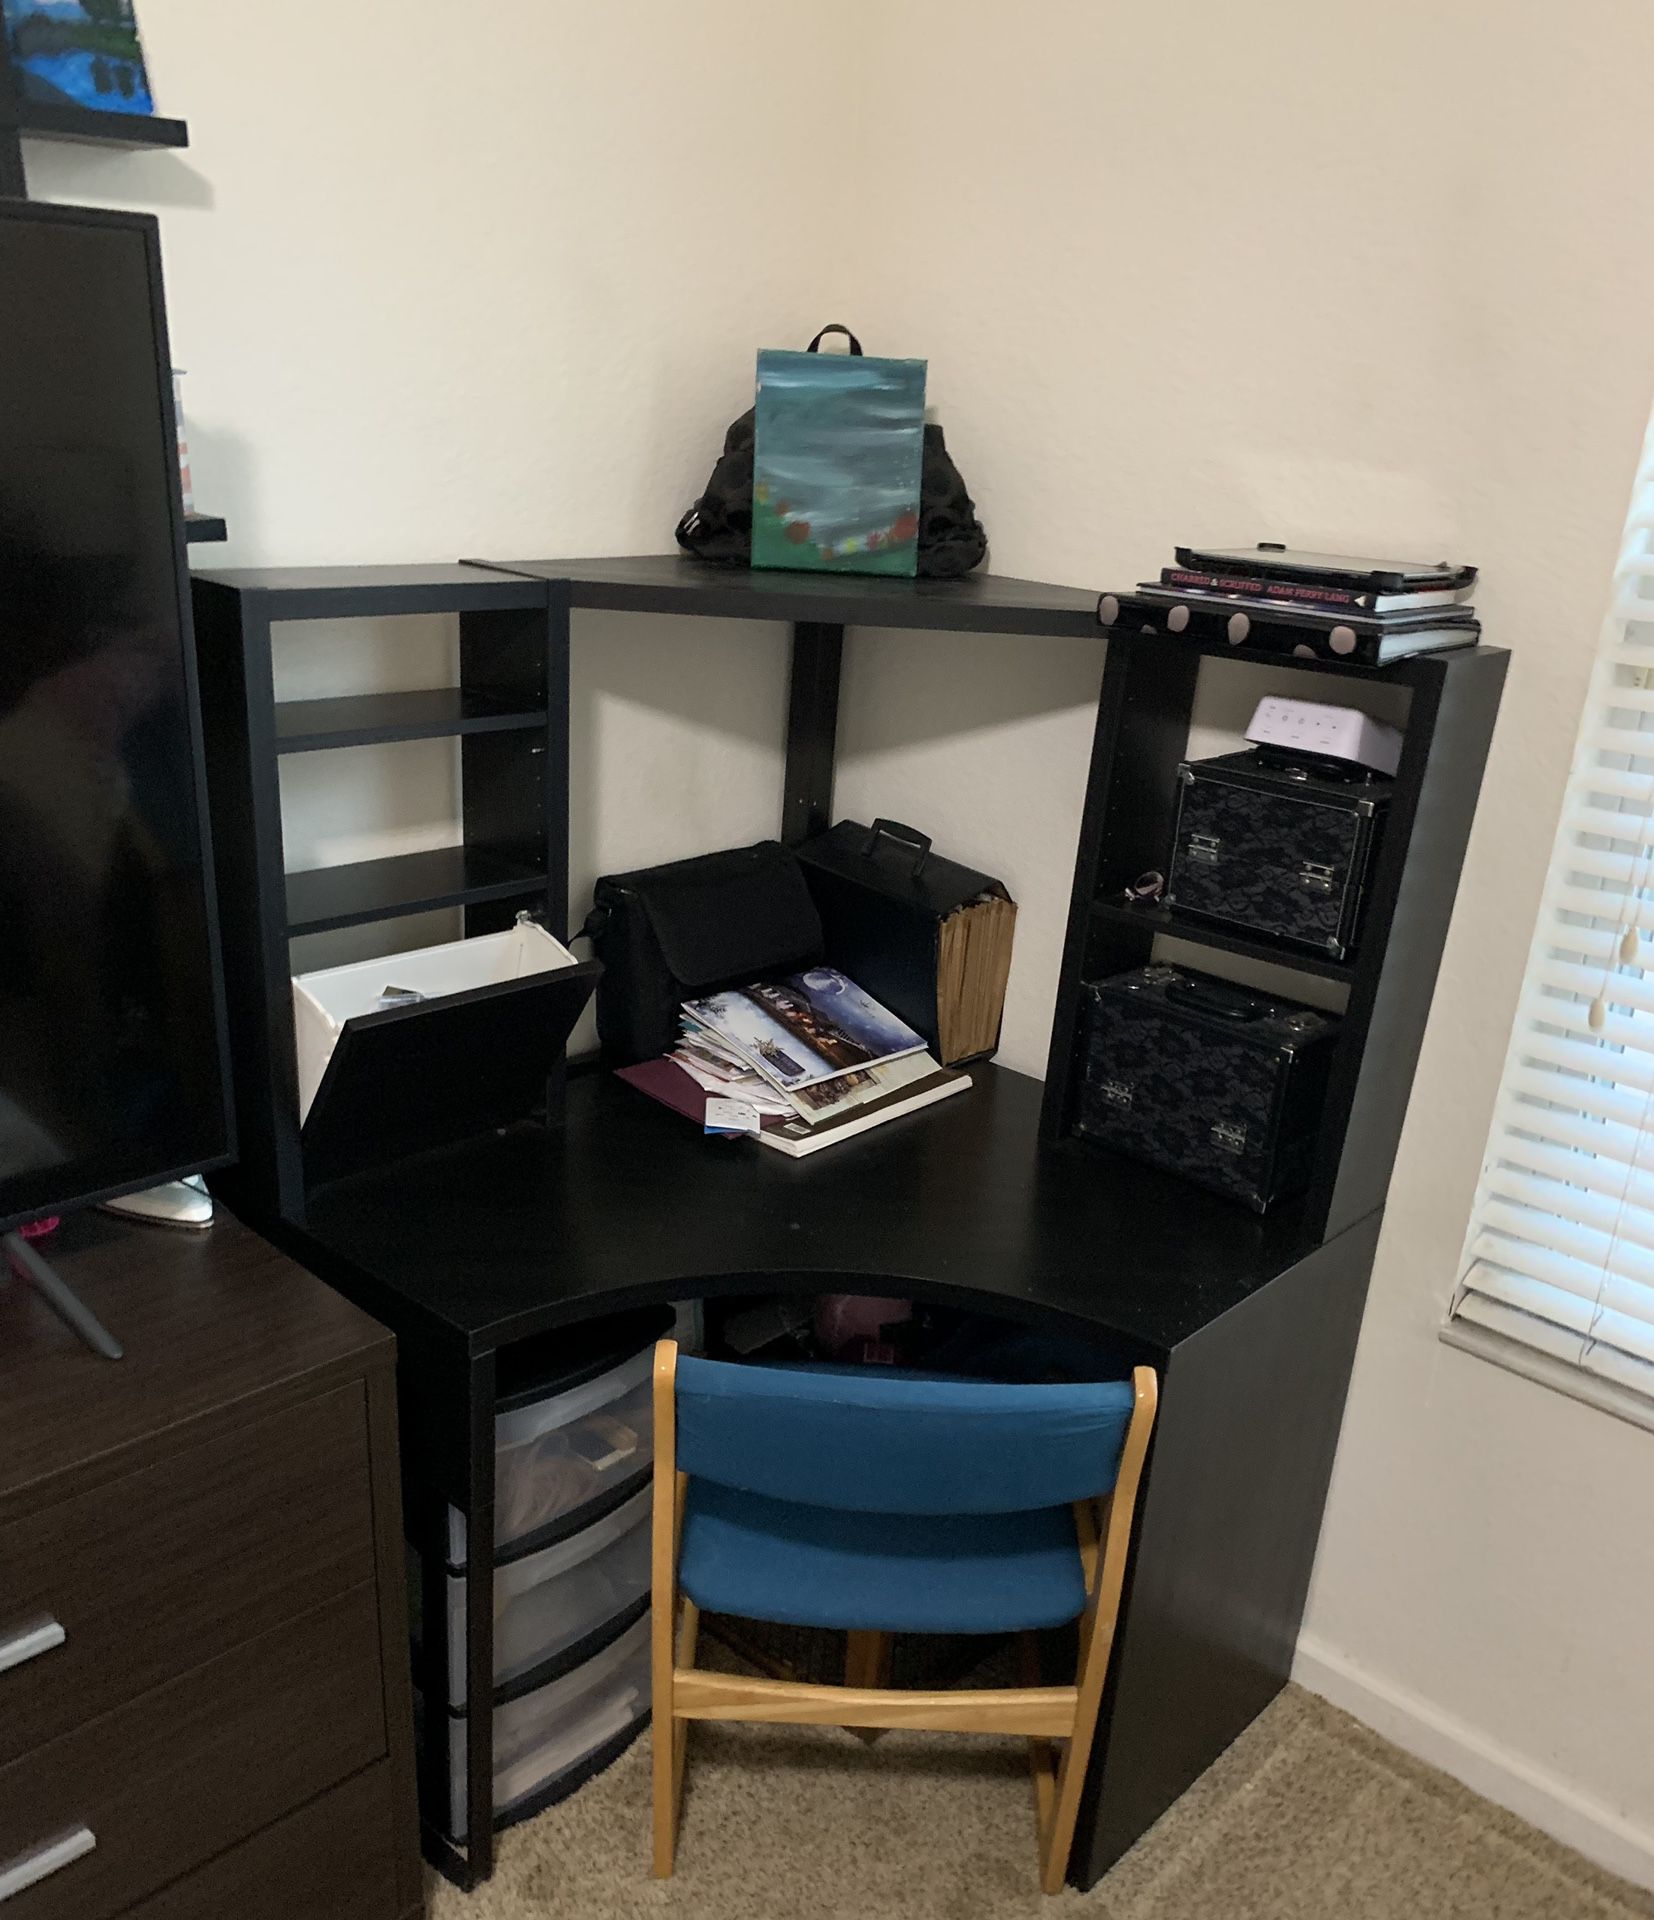 Desk And Chair $59 For All 🎄🎈🎄House Furniture, Office Furniture And Decoration, Desk Chair, Black, Wood, Student Desk, Desktop, Organizer, Storage.